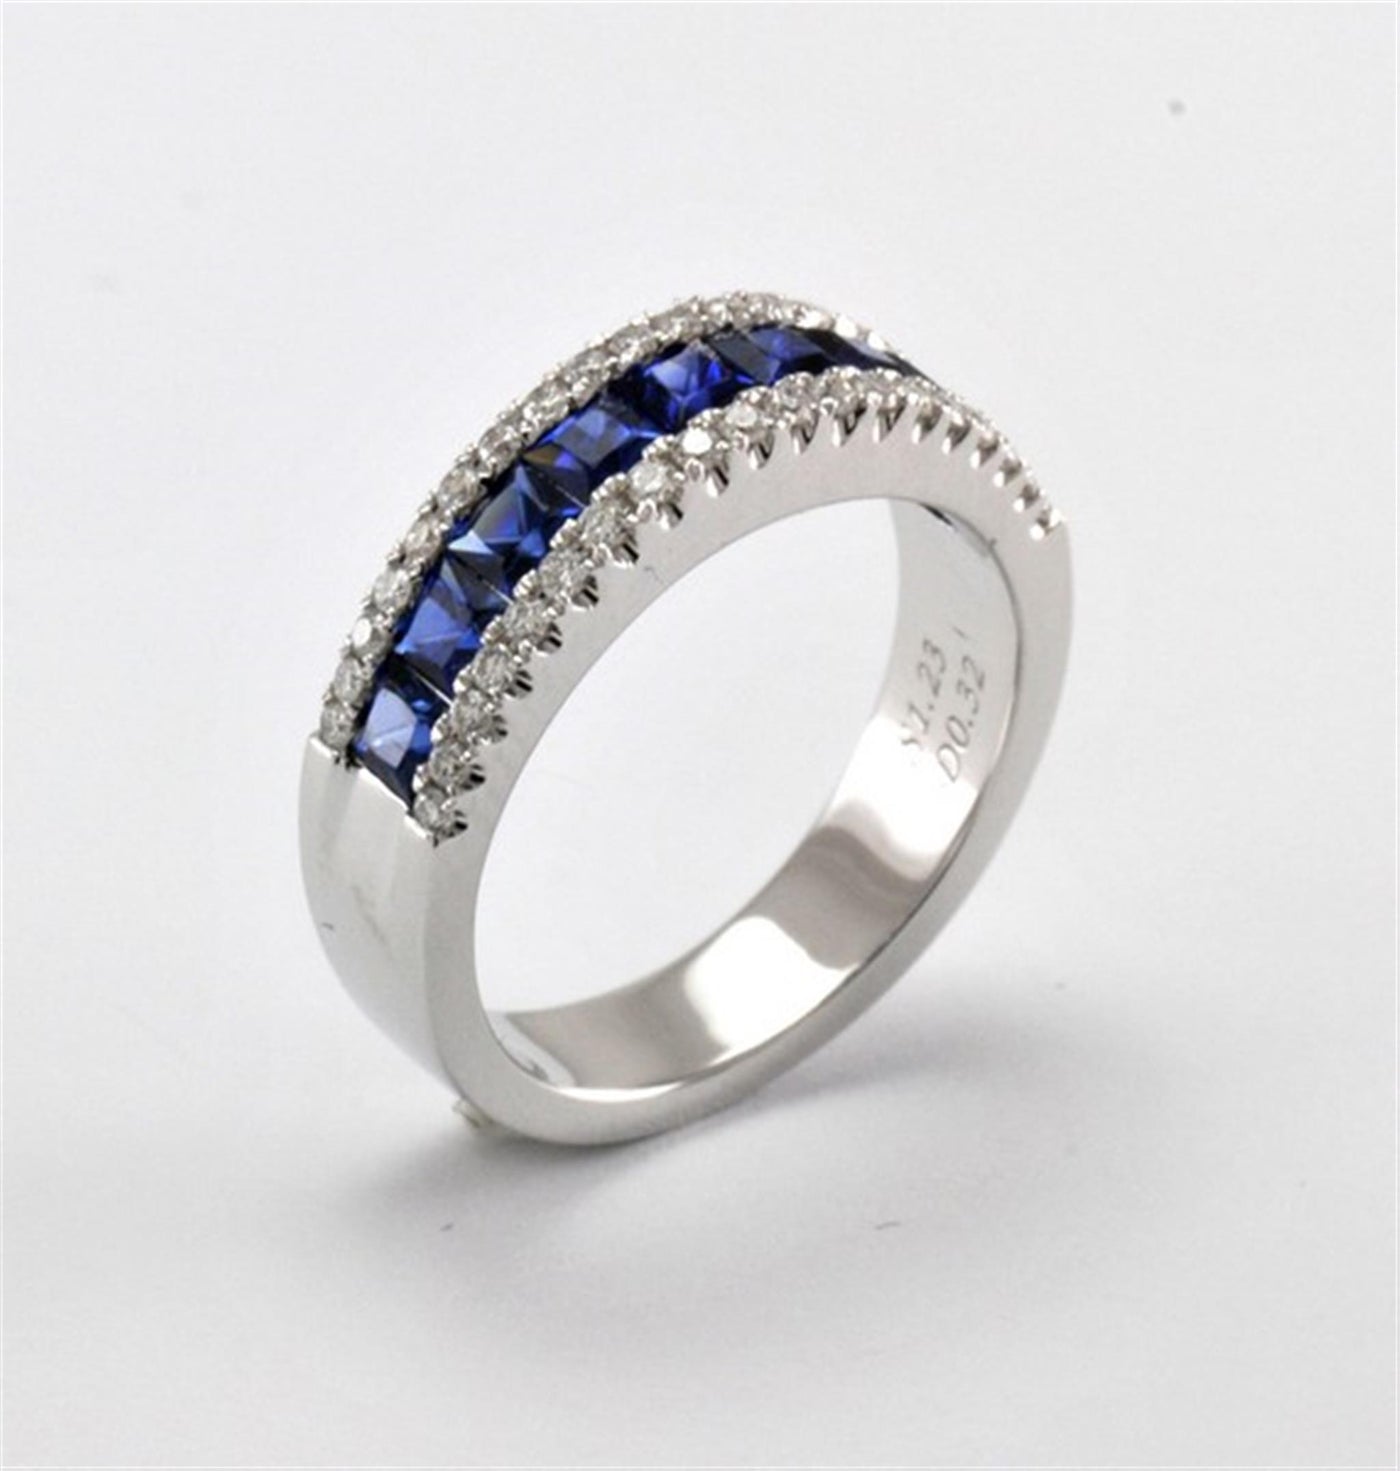 18K White Gold 1.78ctw Band Style Diamond Ring with Sapphires